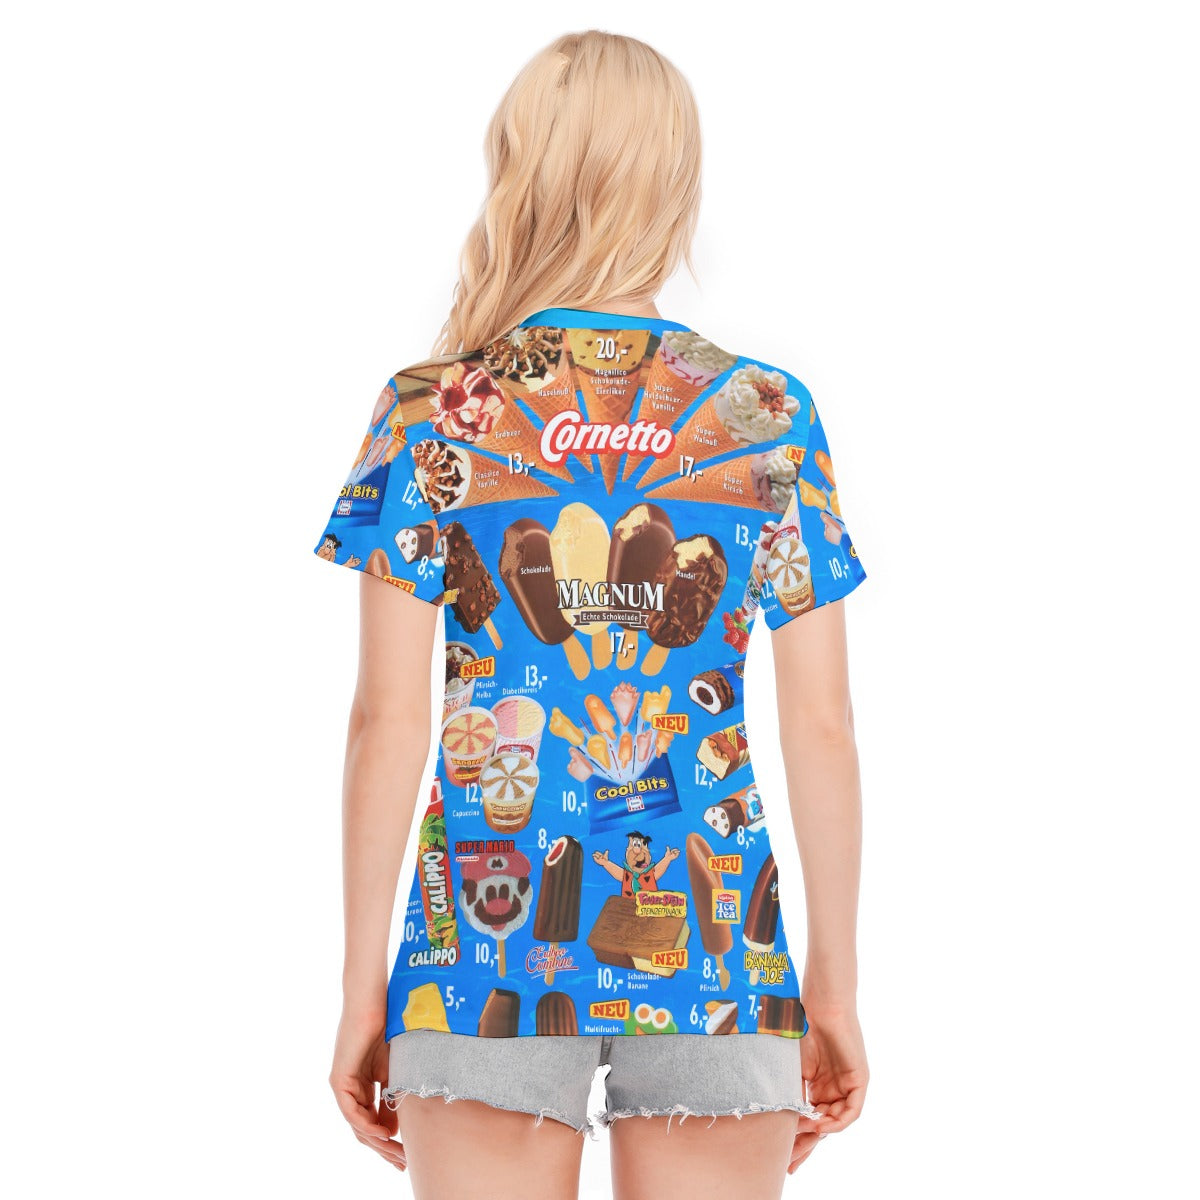 Fun and stylish women's t-shirt perfect for summer.